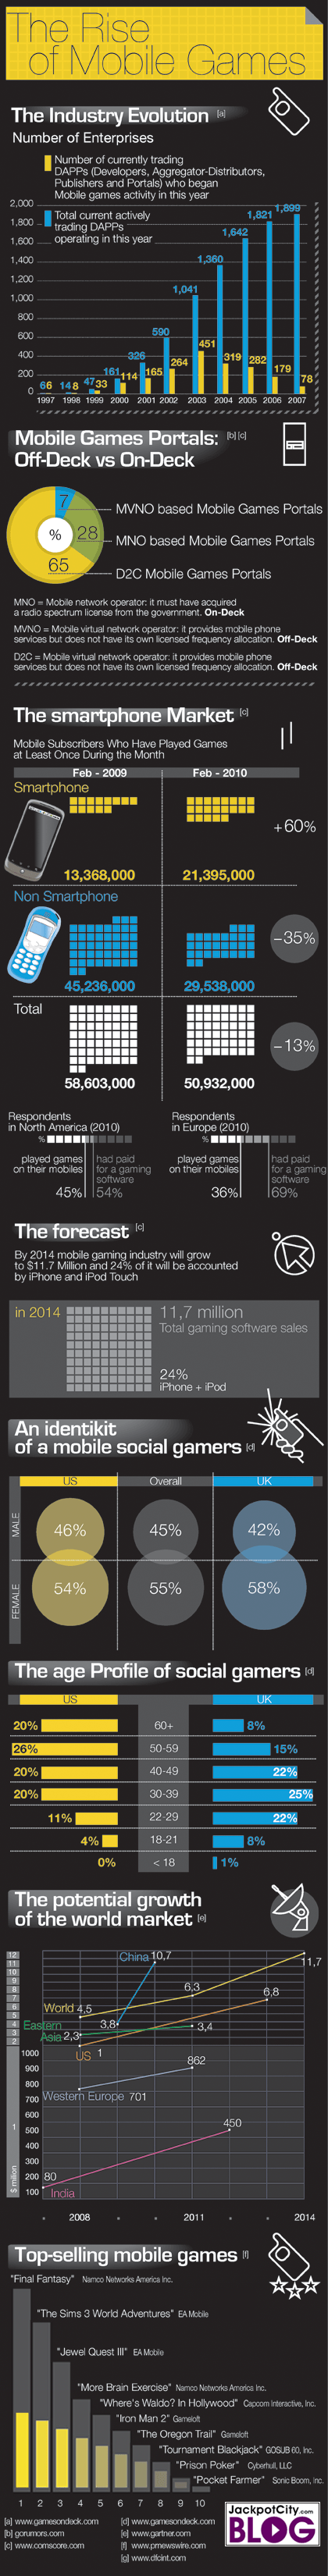 Rise of Mobile Games Infographic